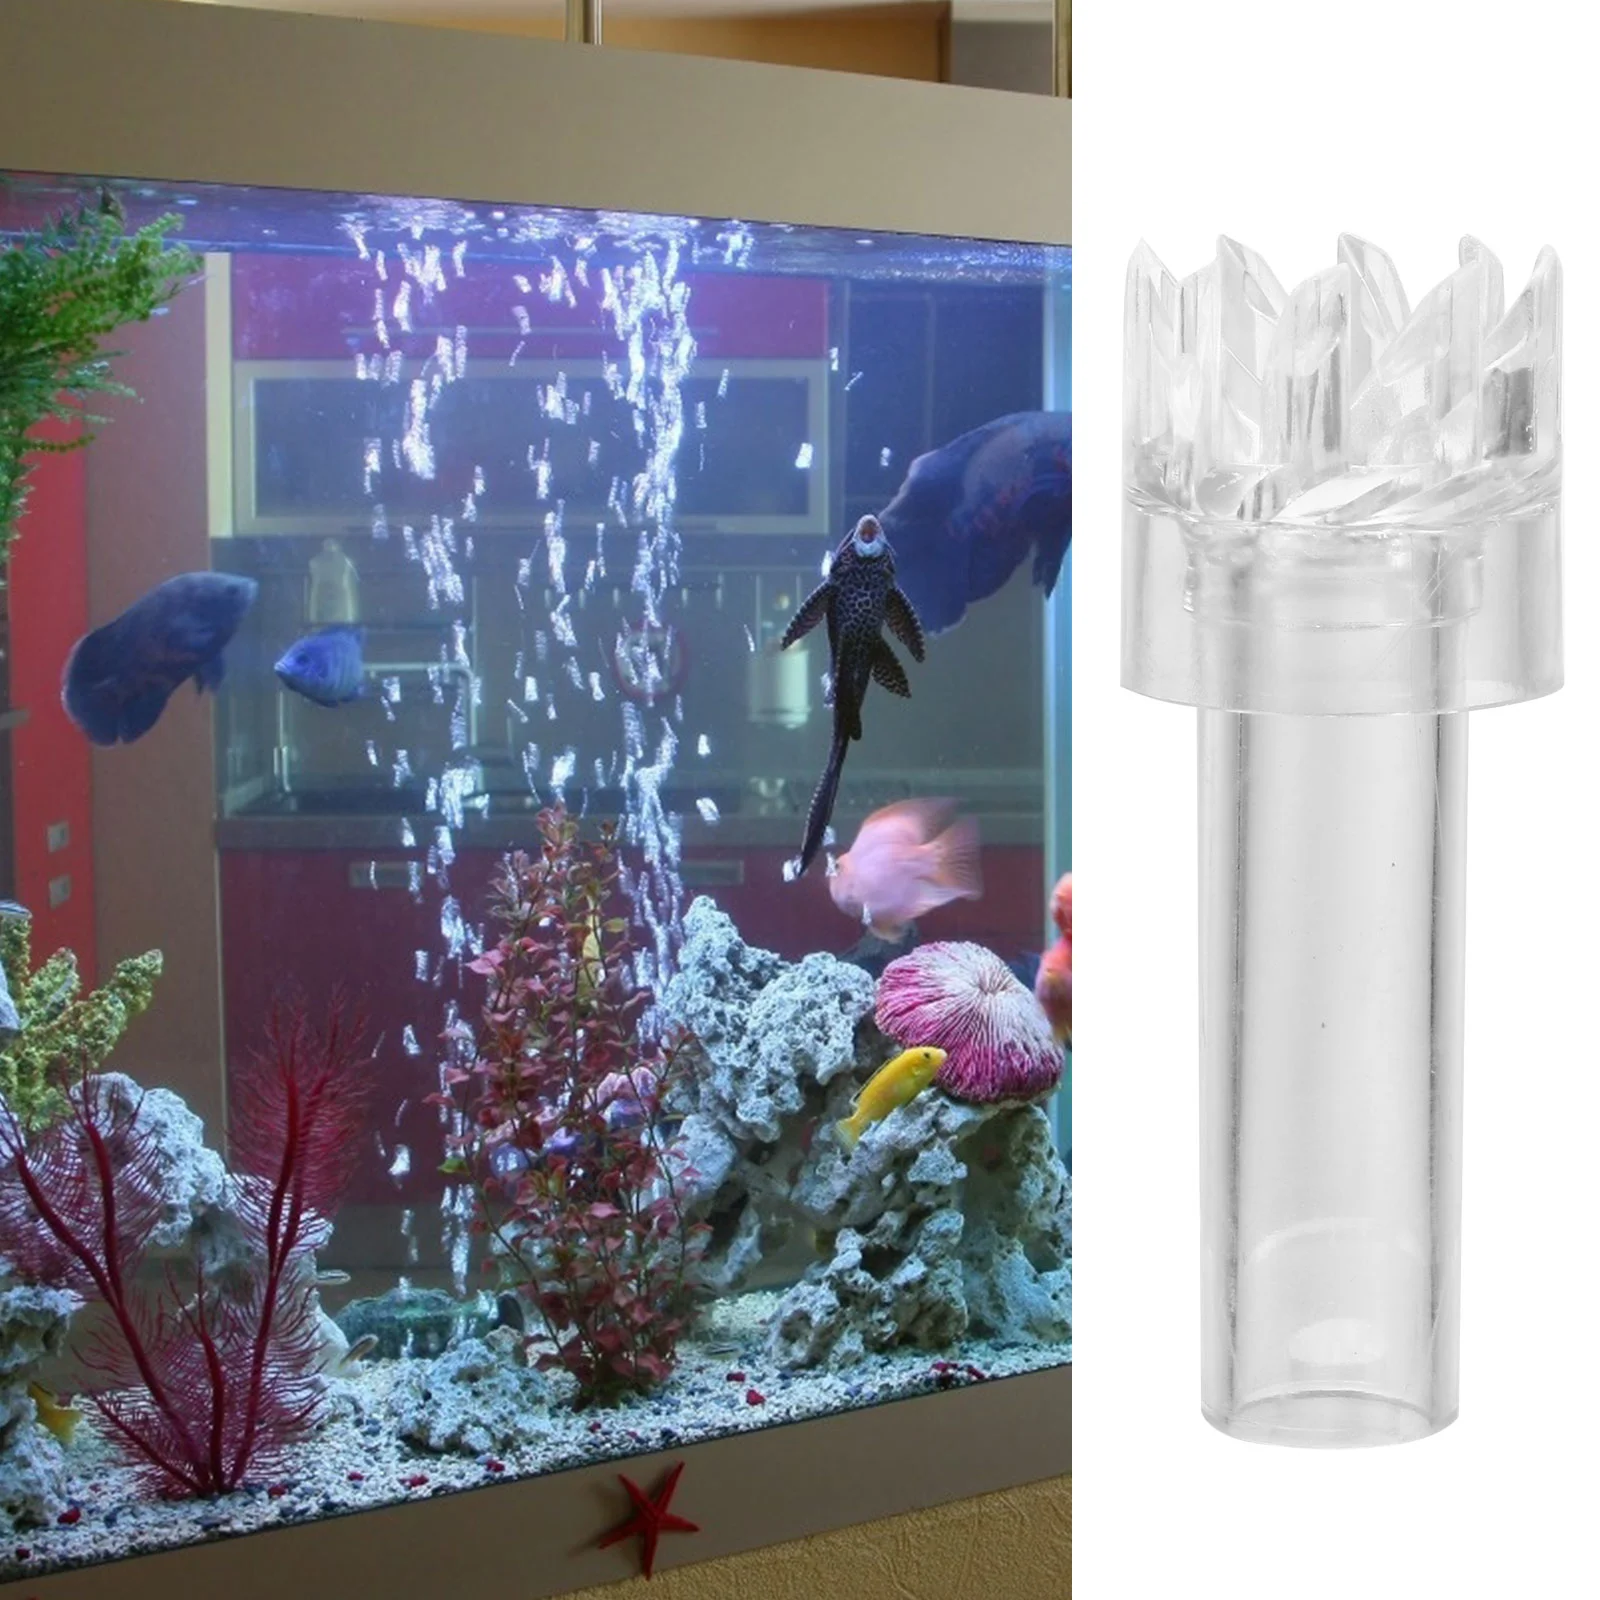 

Oil Film Filter Water Aquarium Processor Tank Fish Removal Remove Degreasing Device Cleanerskimmer Protein Acrylic